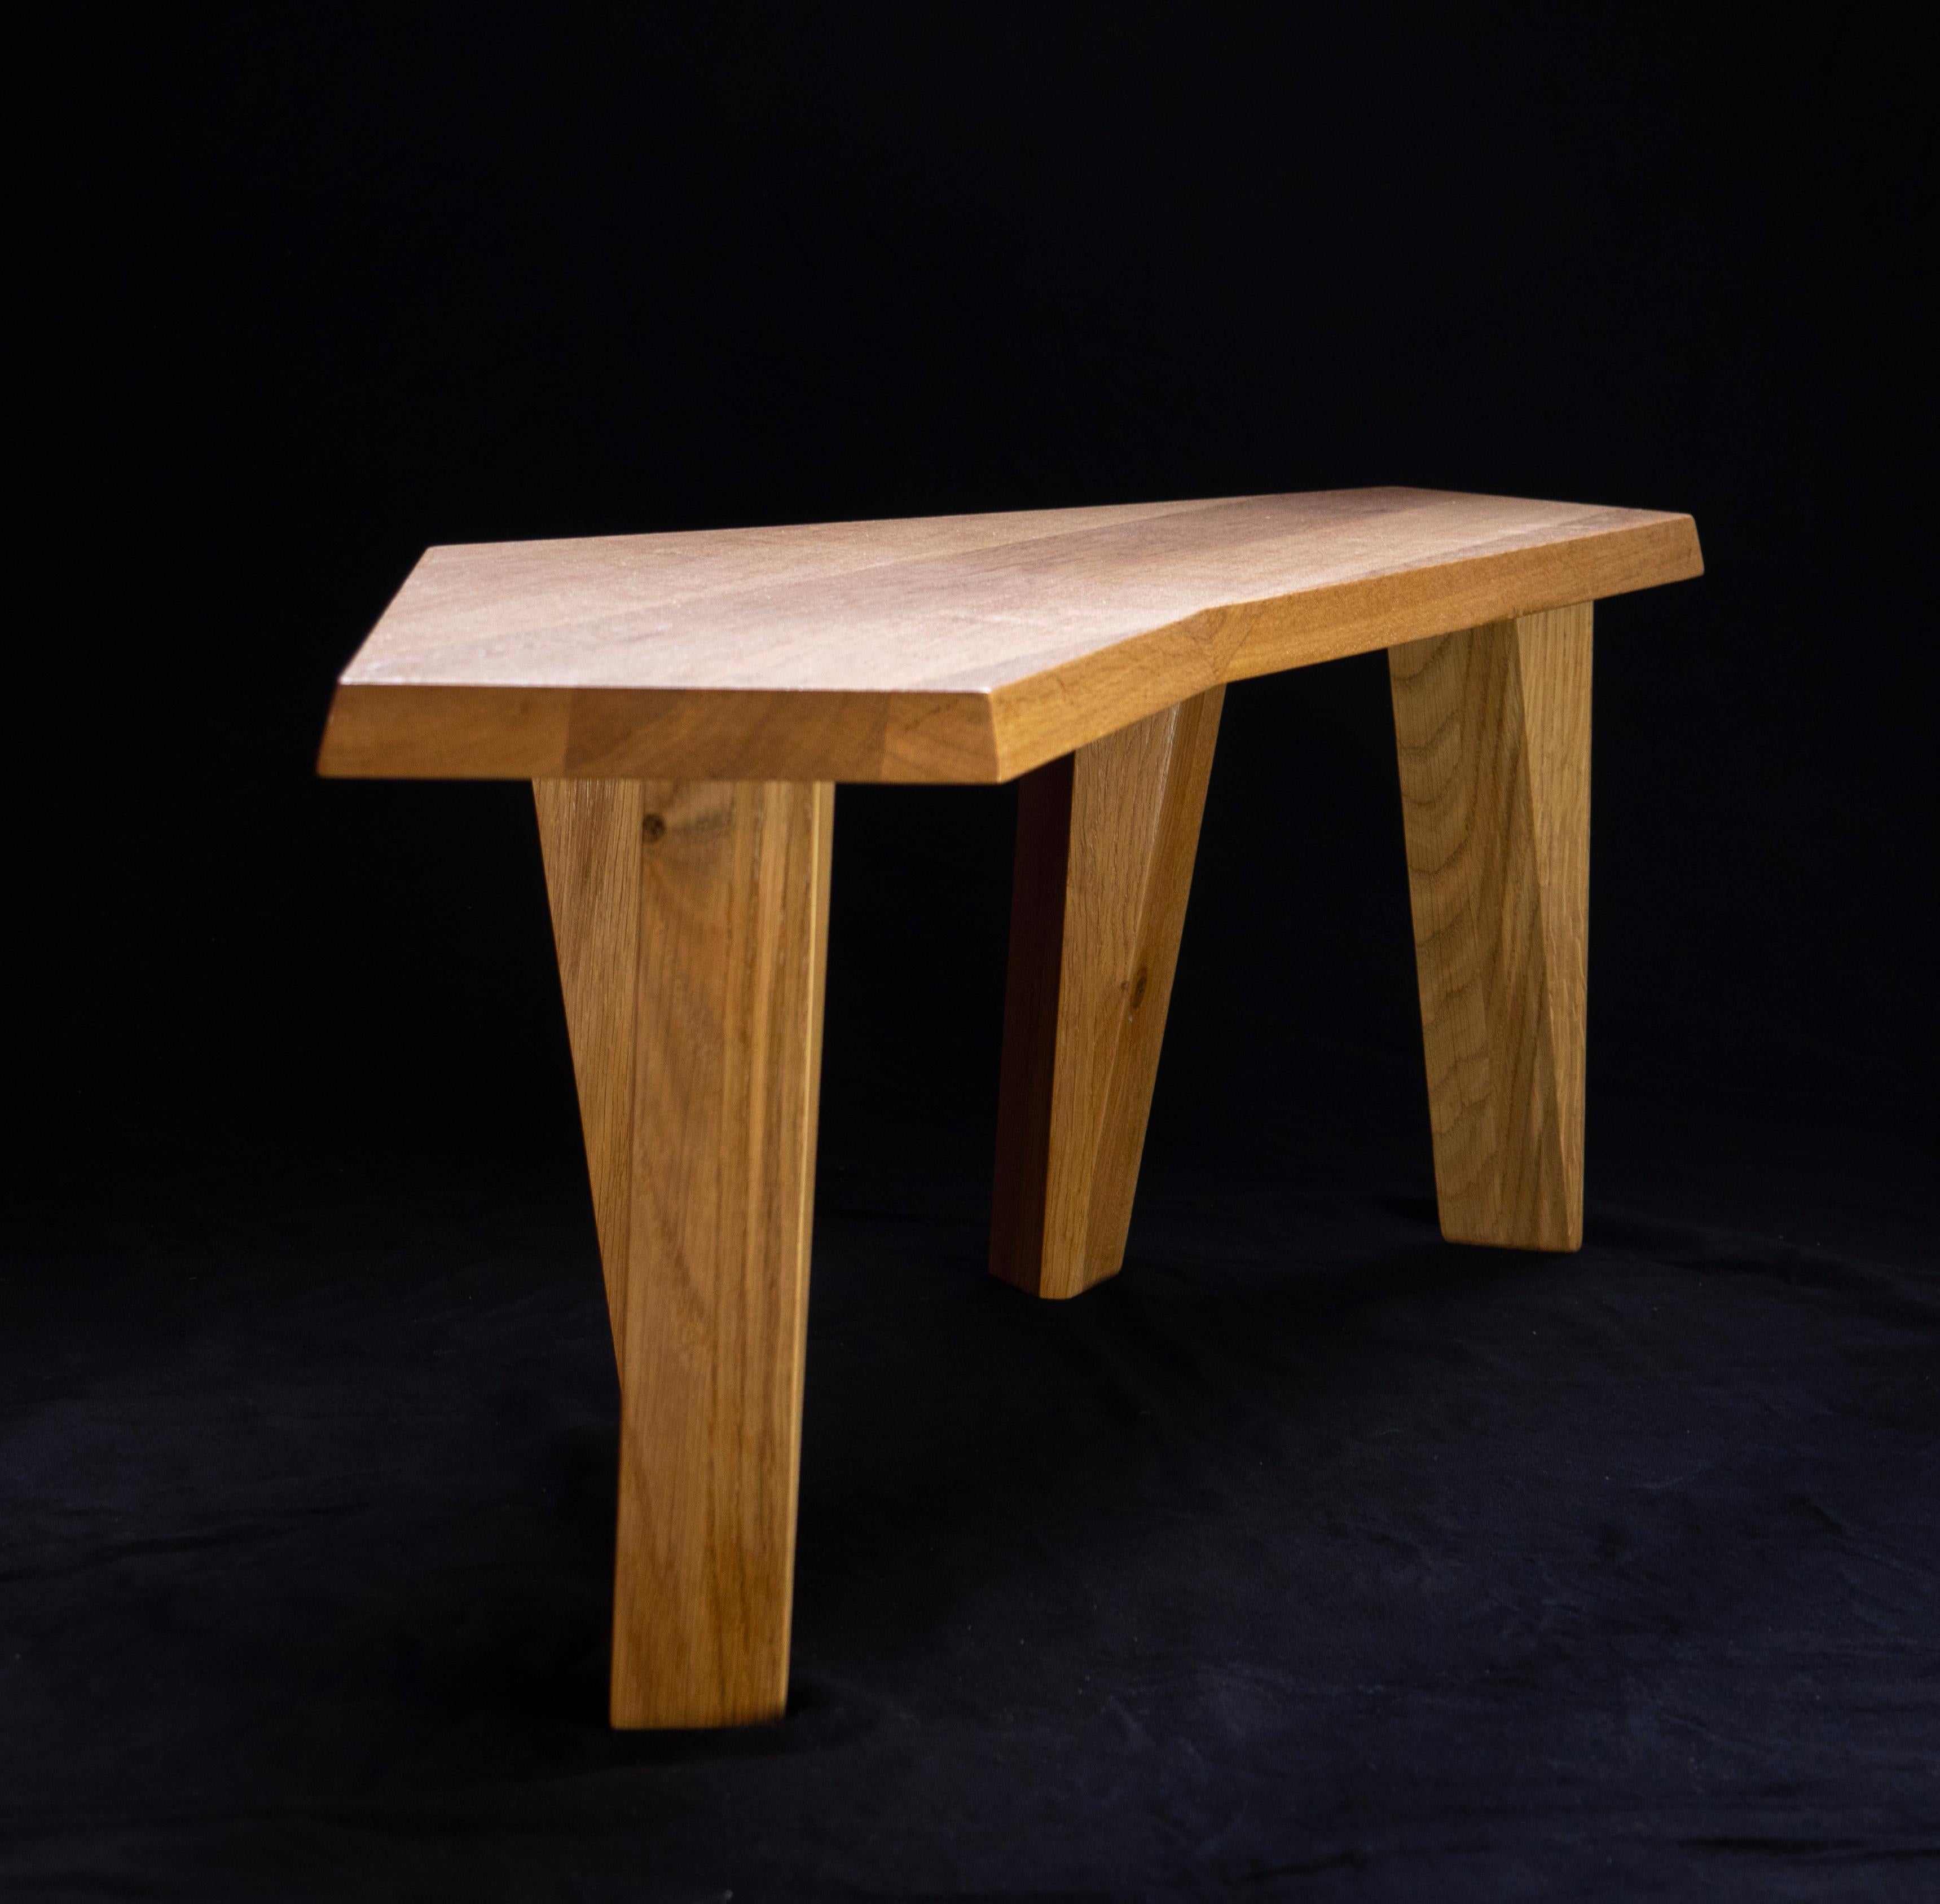 Small coffee table in oak that can double as a bench. This sculptural piece by Jacques Jarrige feels animated by the hand of the artist. The jagged top is supported by four asymmetrical legs.